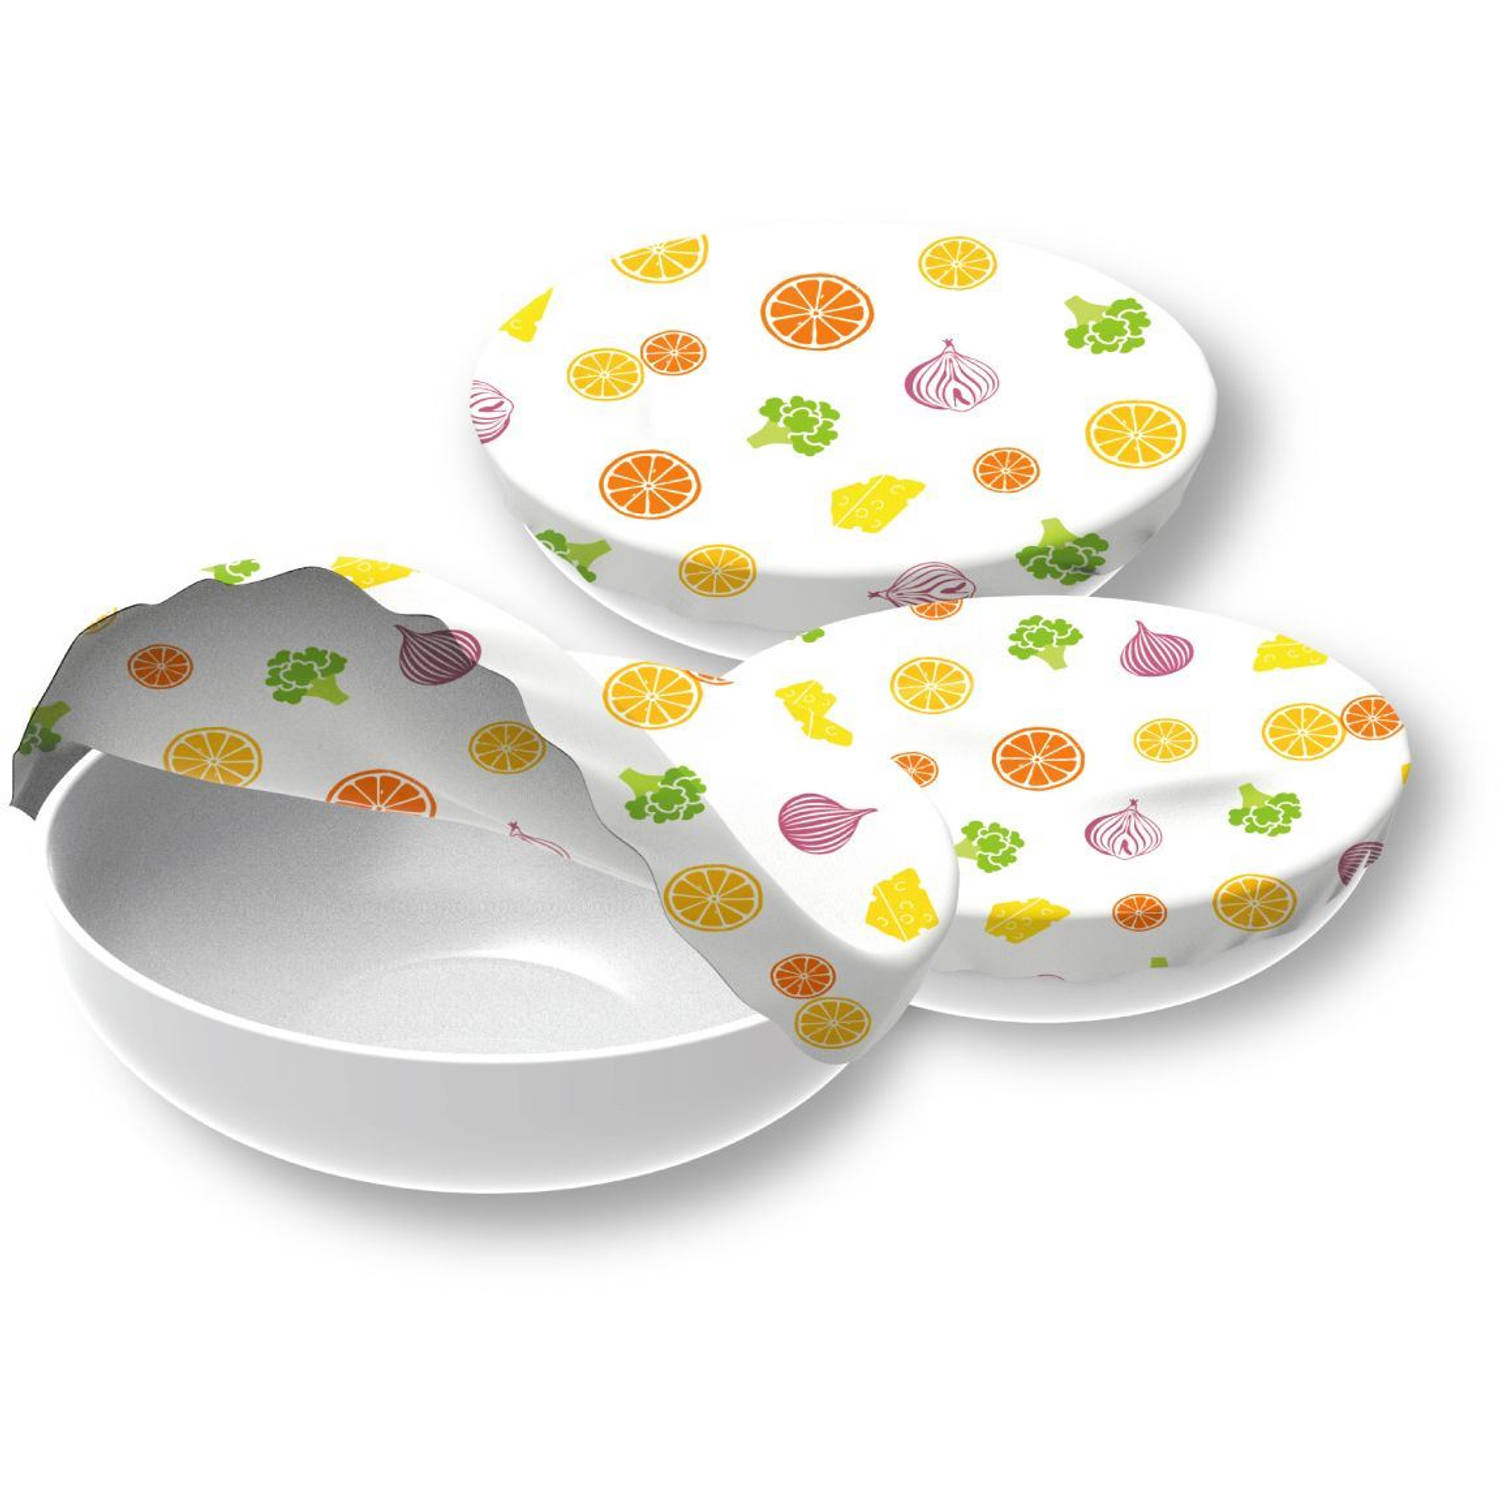 Bee's Wax - Ethno Textile Bowl Covers